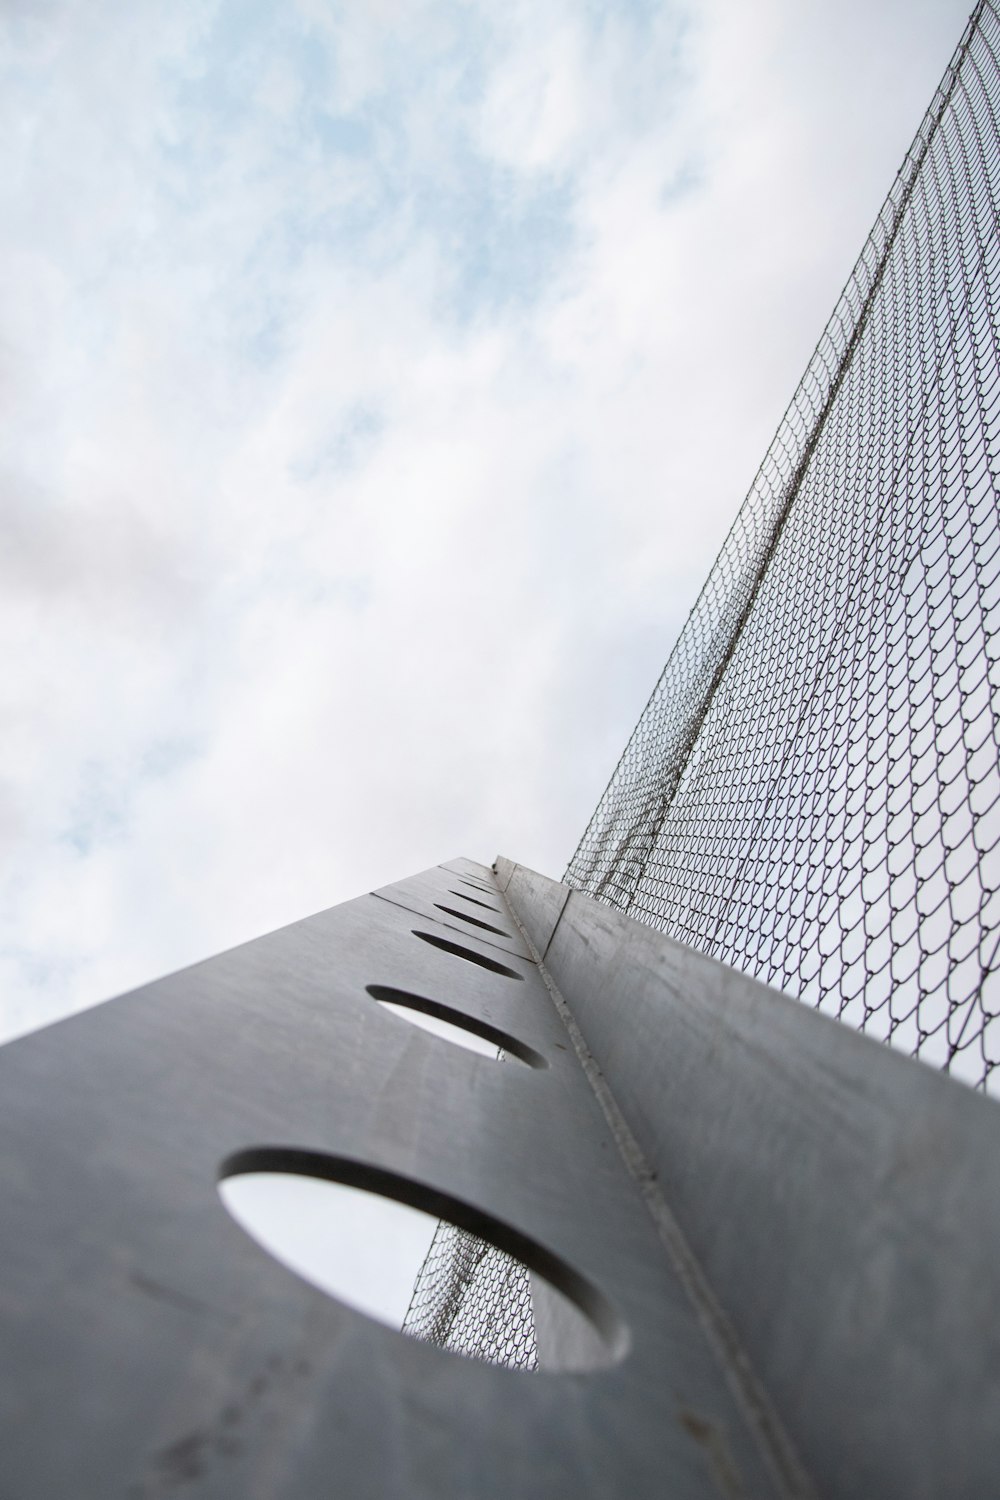 a tall metal structure with a sky in the background